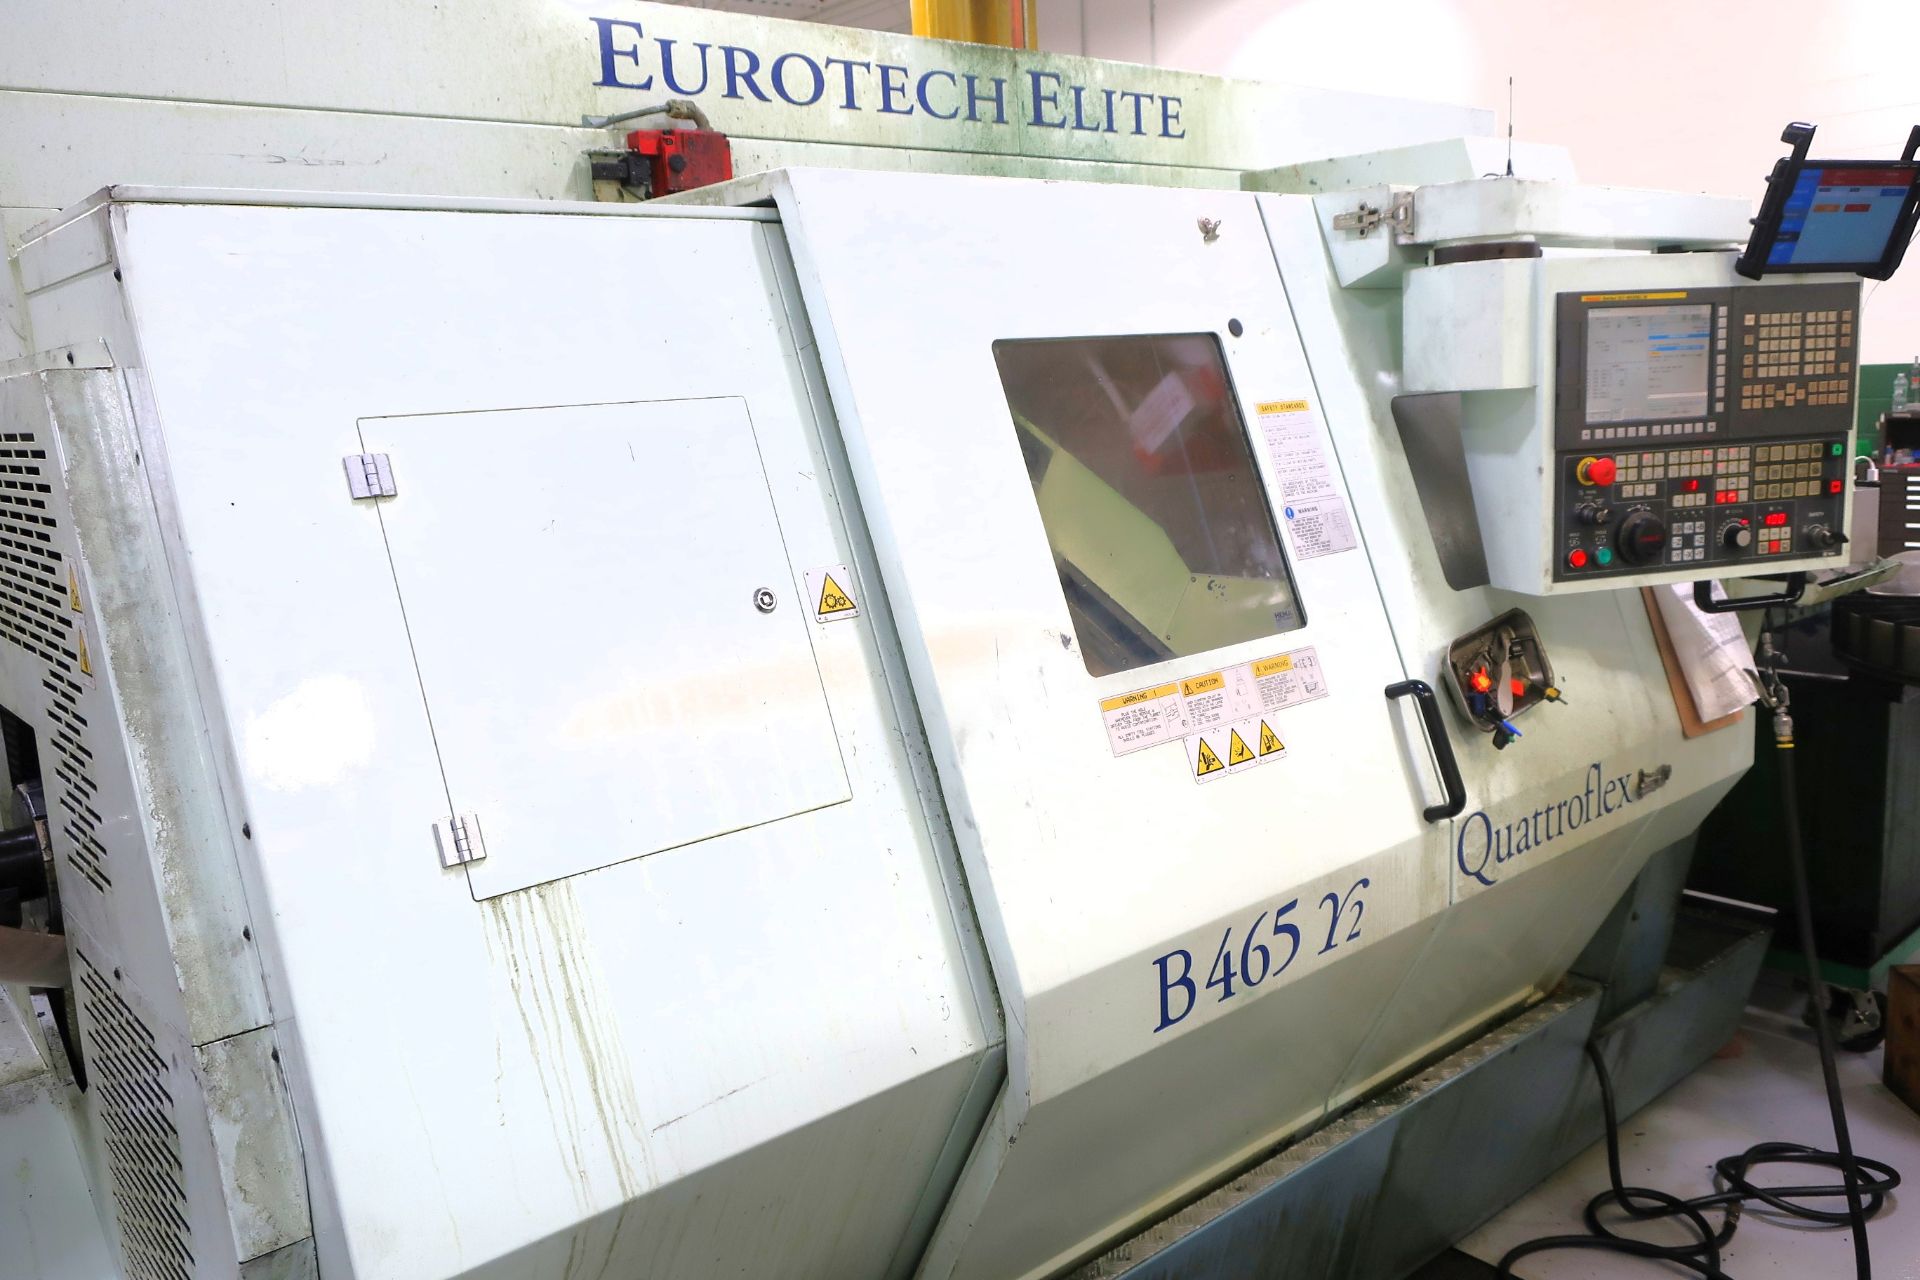 EUROTECH B465 Y2 QUATROFLEX TWIN SPINDLE TWIN TURRET CNC LATHE W/DUAL Y-AXIS, NEW 2011, SN 11129 - Image 9 of 19